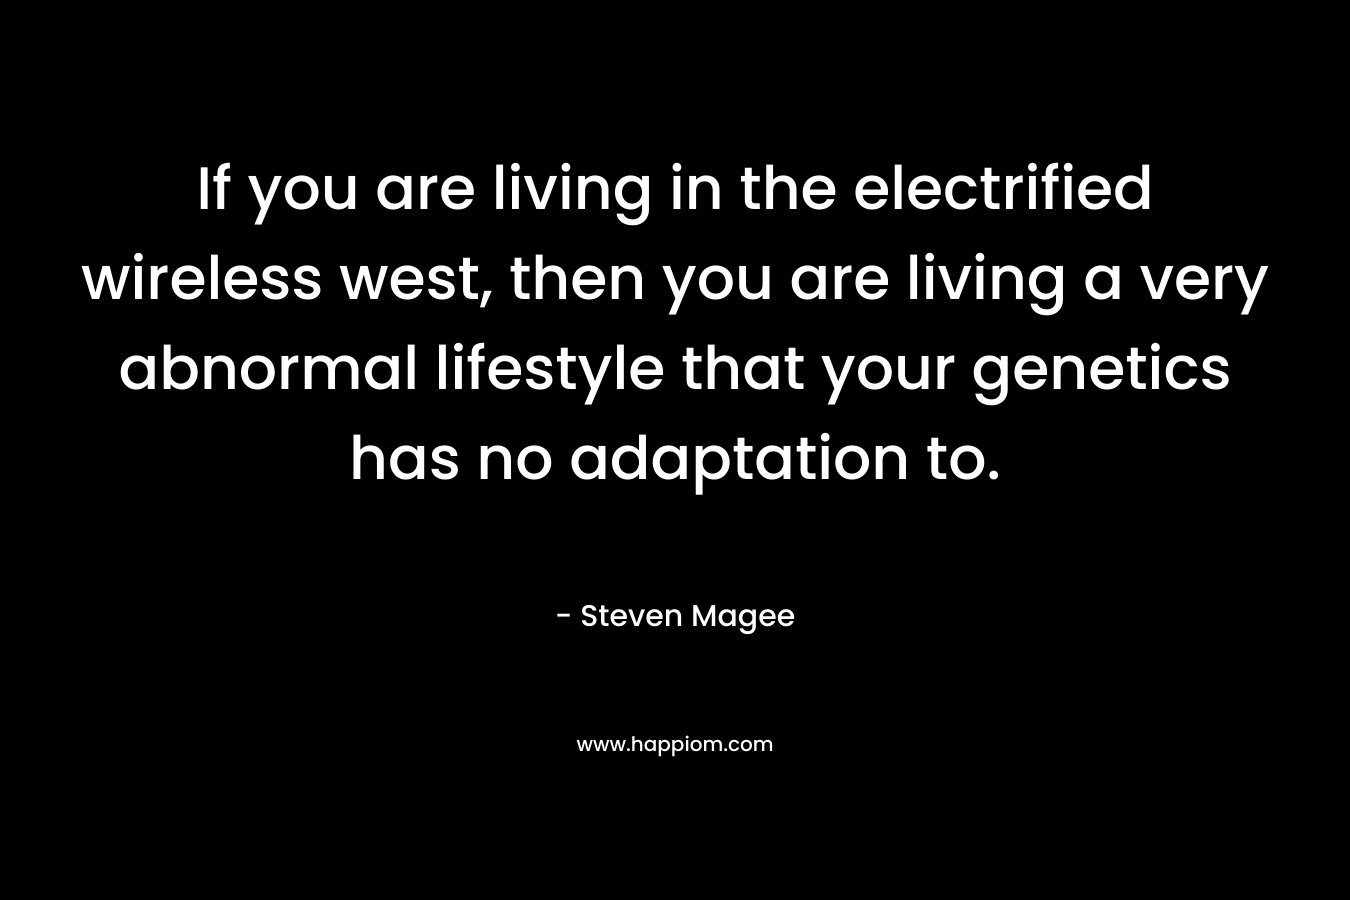 If you are living in the electrified wireless west, then you are living a very abnormal lifestyle that your genetics has no adaptation to.